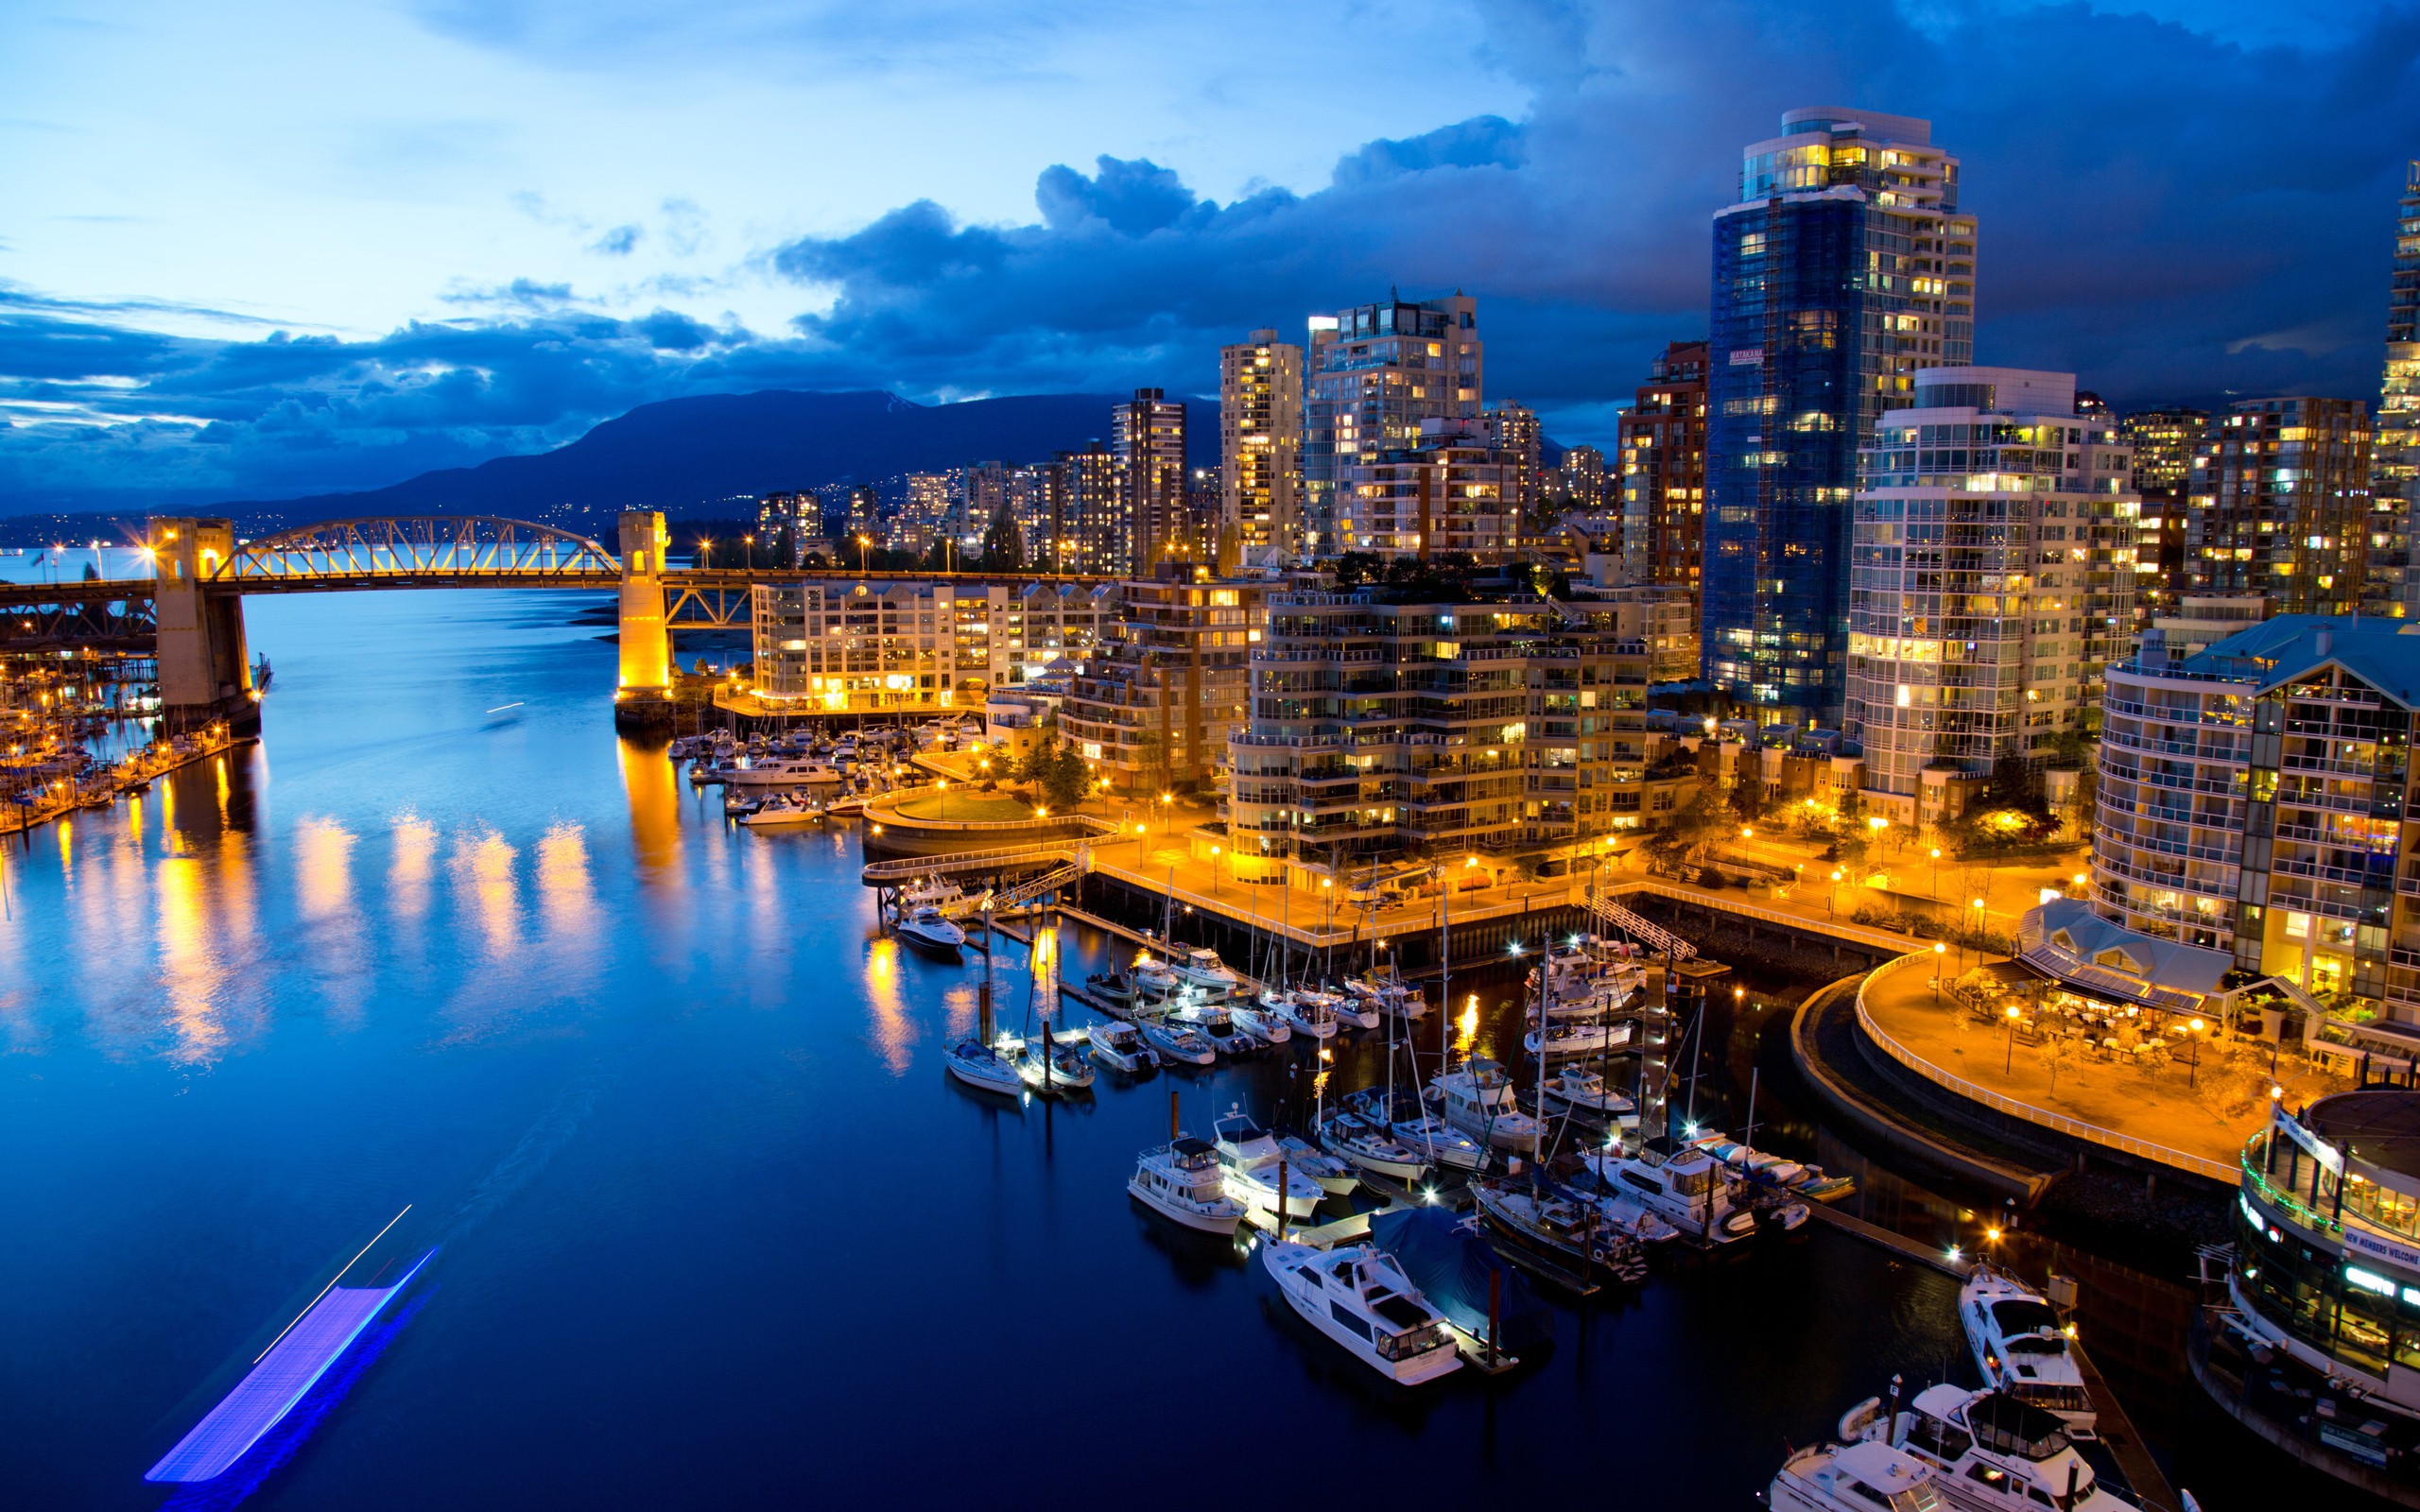 24530 Vancouver Canada Cities Hdr Night Lights Architecture Buildings Water Waterways Marina Harbor Reflections Vehicles Boats Sky Skies Clouds Places 3 